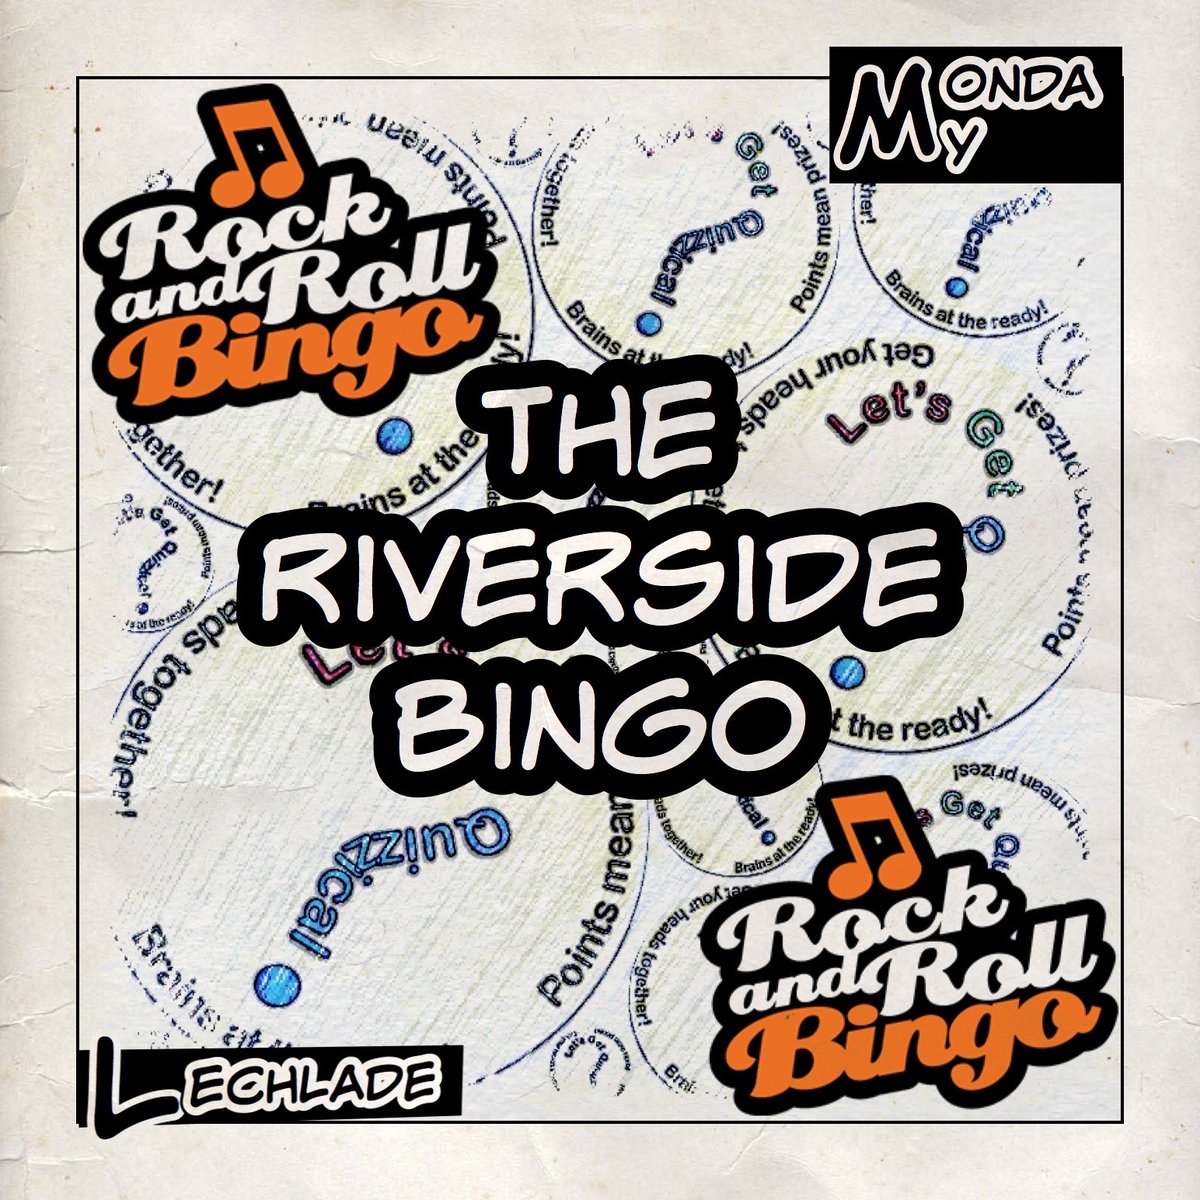 It’s #RockAndRollBingo night at #TheRiverside in #Lechlade! 7:30pm start for games of #Music #Bingo with cash to be won